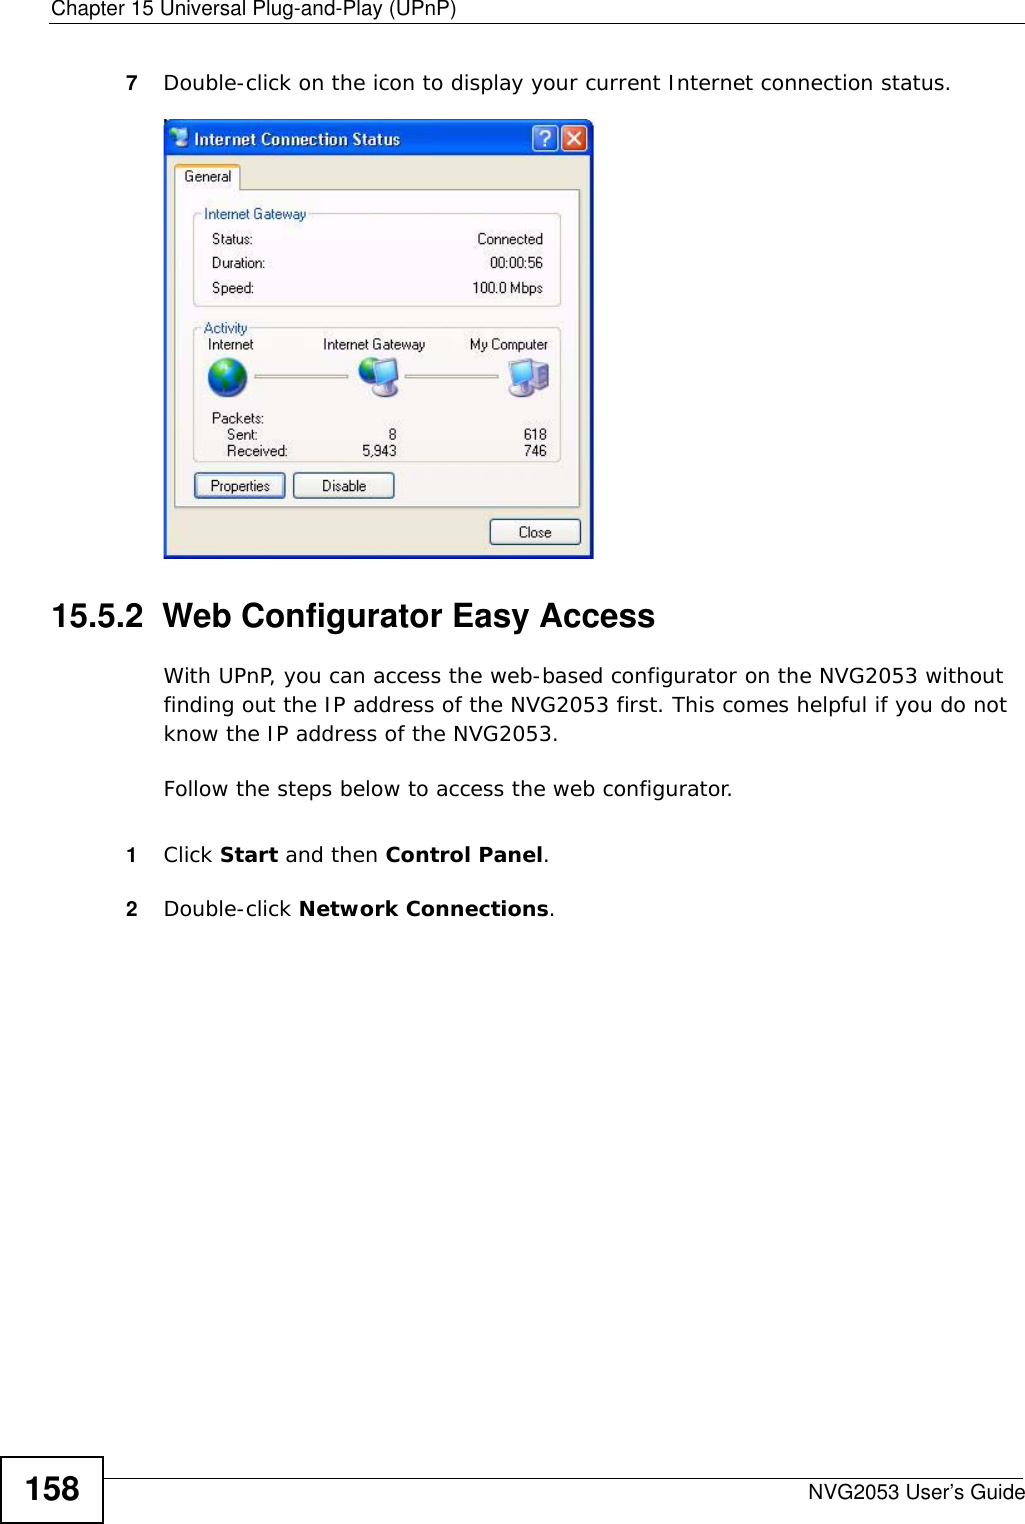 Chapter 15 Universal Plug-and-Play (UPnP)NVG2053 User’s Guide1587Double-click on the icon to display your current Internet connection status.Internet Connection Status15.5.2  Web Configurator Easy AccessWith UPnP, you can access the web-based configurator on the NVG2053 without finding out the IP address of the NVG2053 first. This comes helpful if you do not know the IP address of the NVG2053.Follow the steps below to access the web configurator.1Click Start and then Control Panel. 2Double-click Network Connections. 